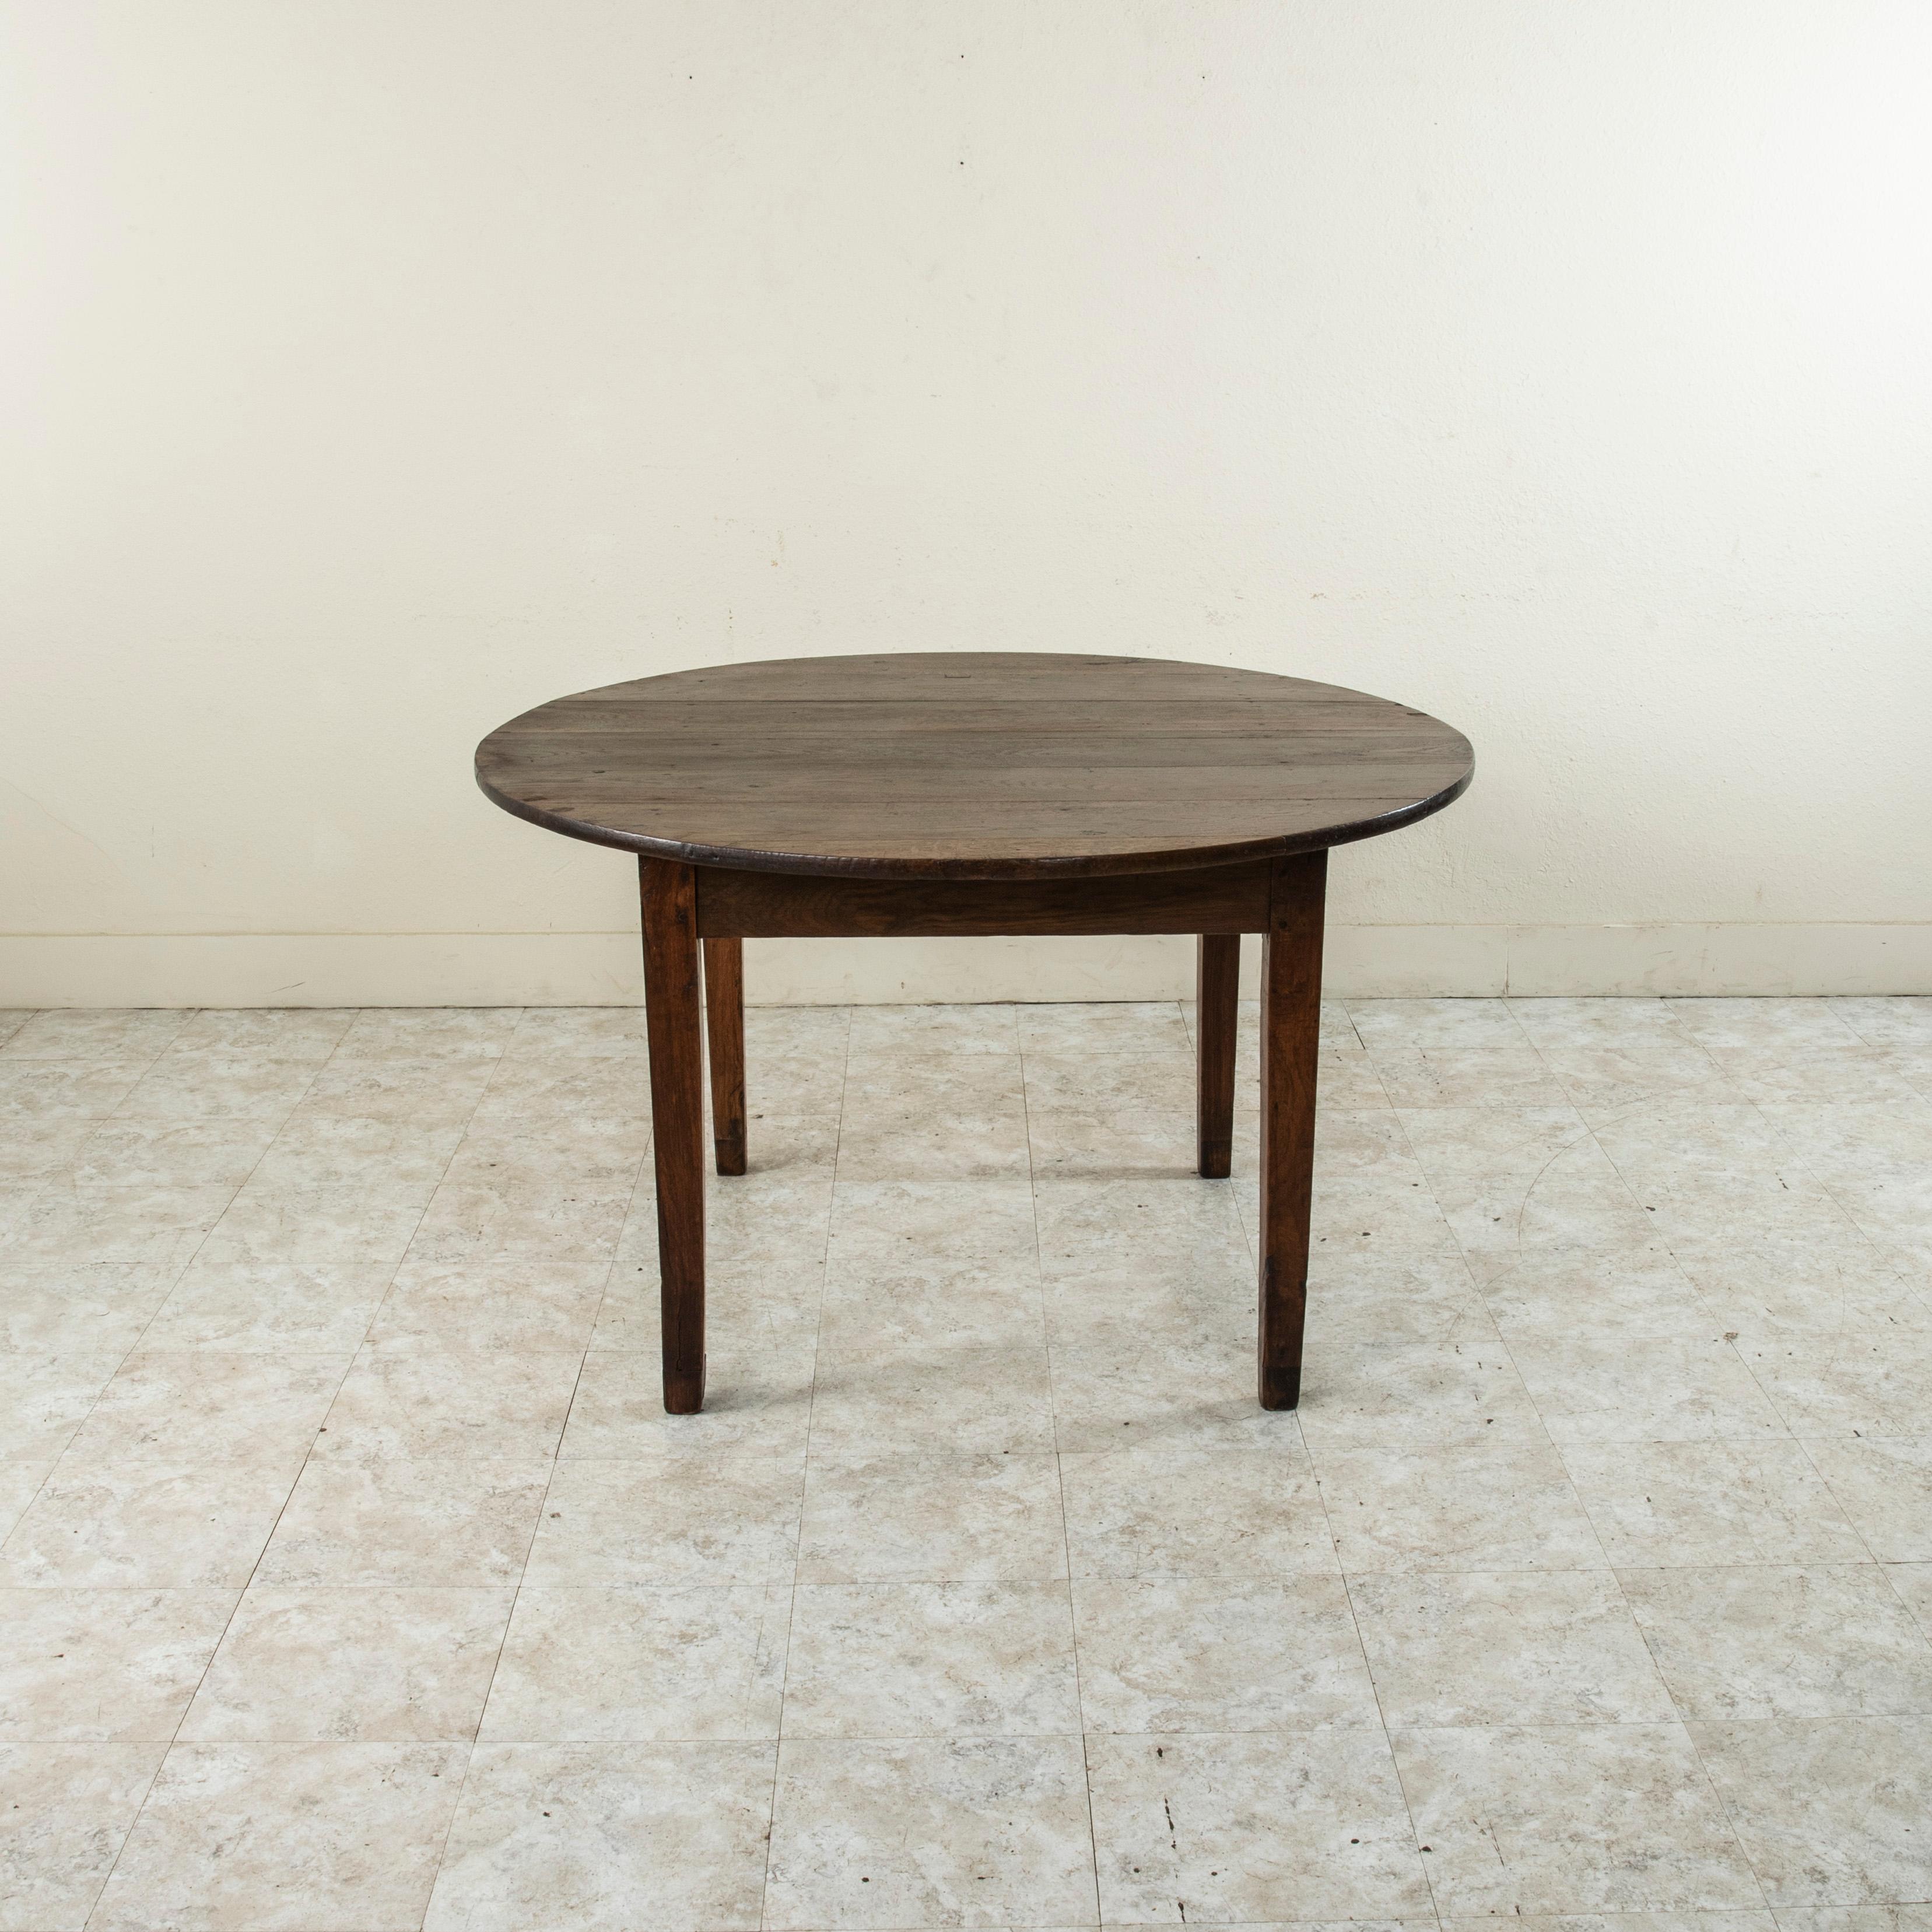 This French artisan made round farm table from the turn of the twentieth century features a solid oak top that measures 51.25 inches in diameter. Resting on a hand pegged oak base of mortise and tenon joinery with four gently tapered square legs,